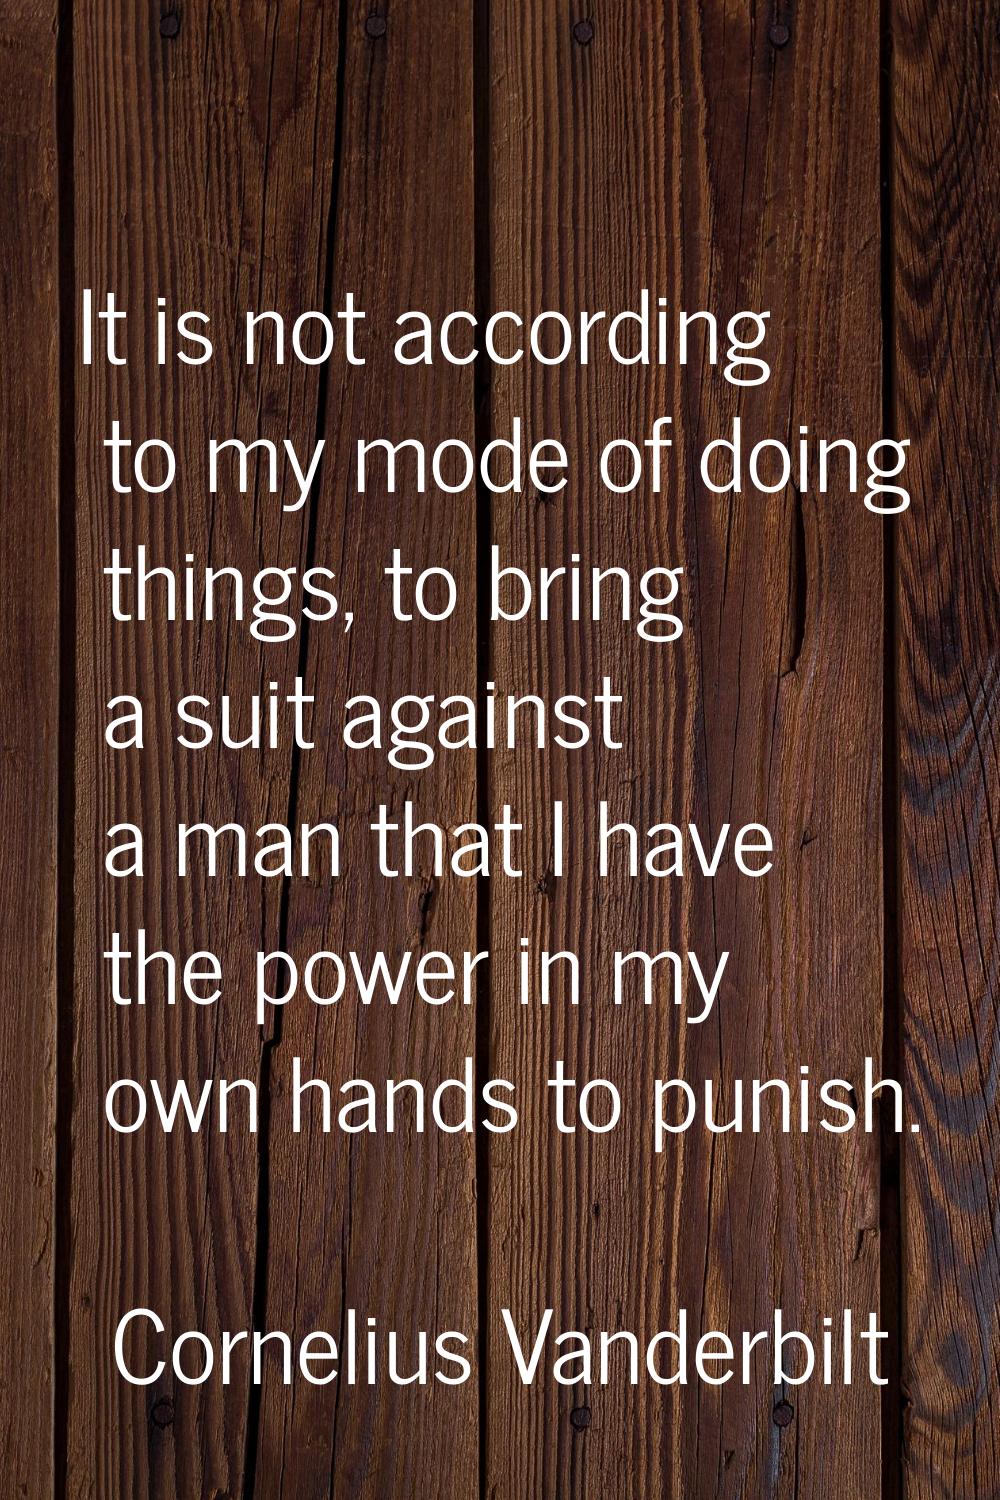 It is not according to my mode of doing things, to bring a suit against a man that I have the power